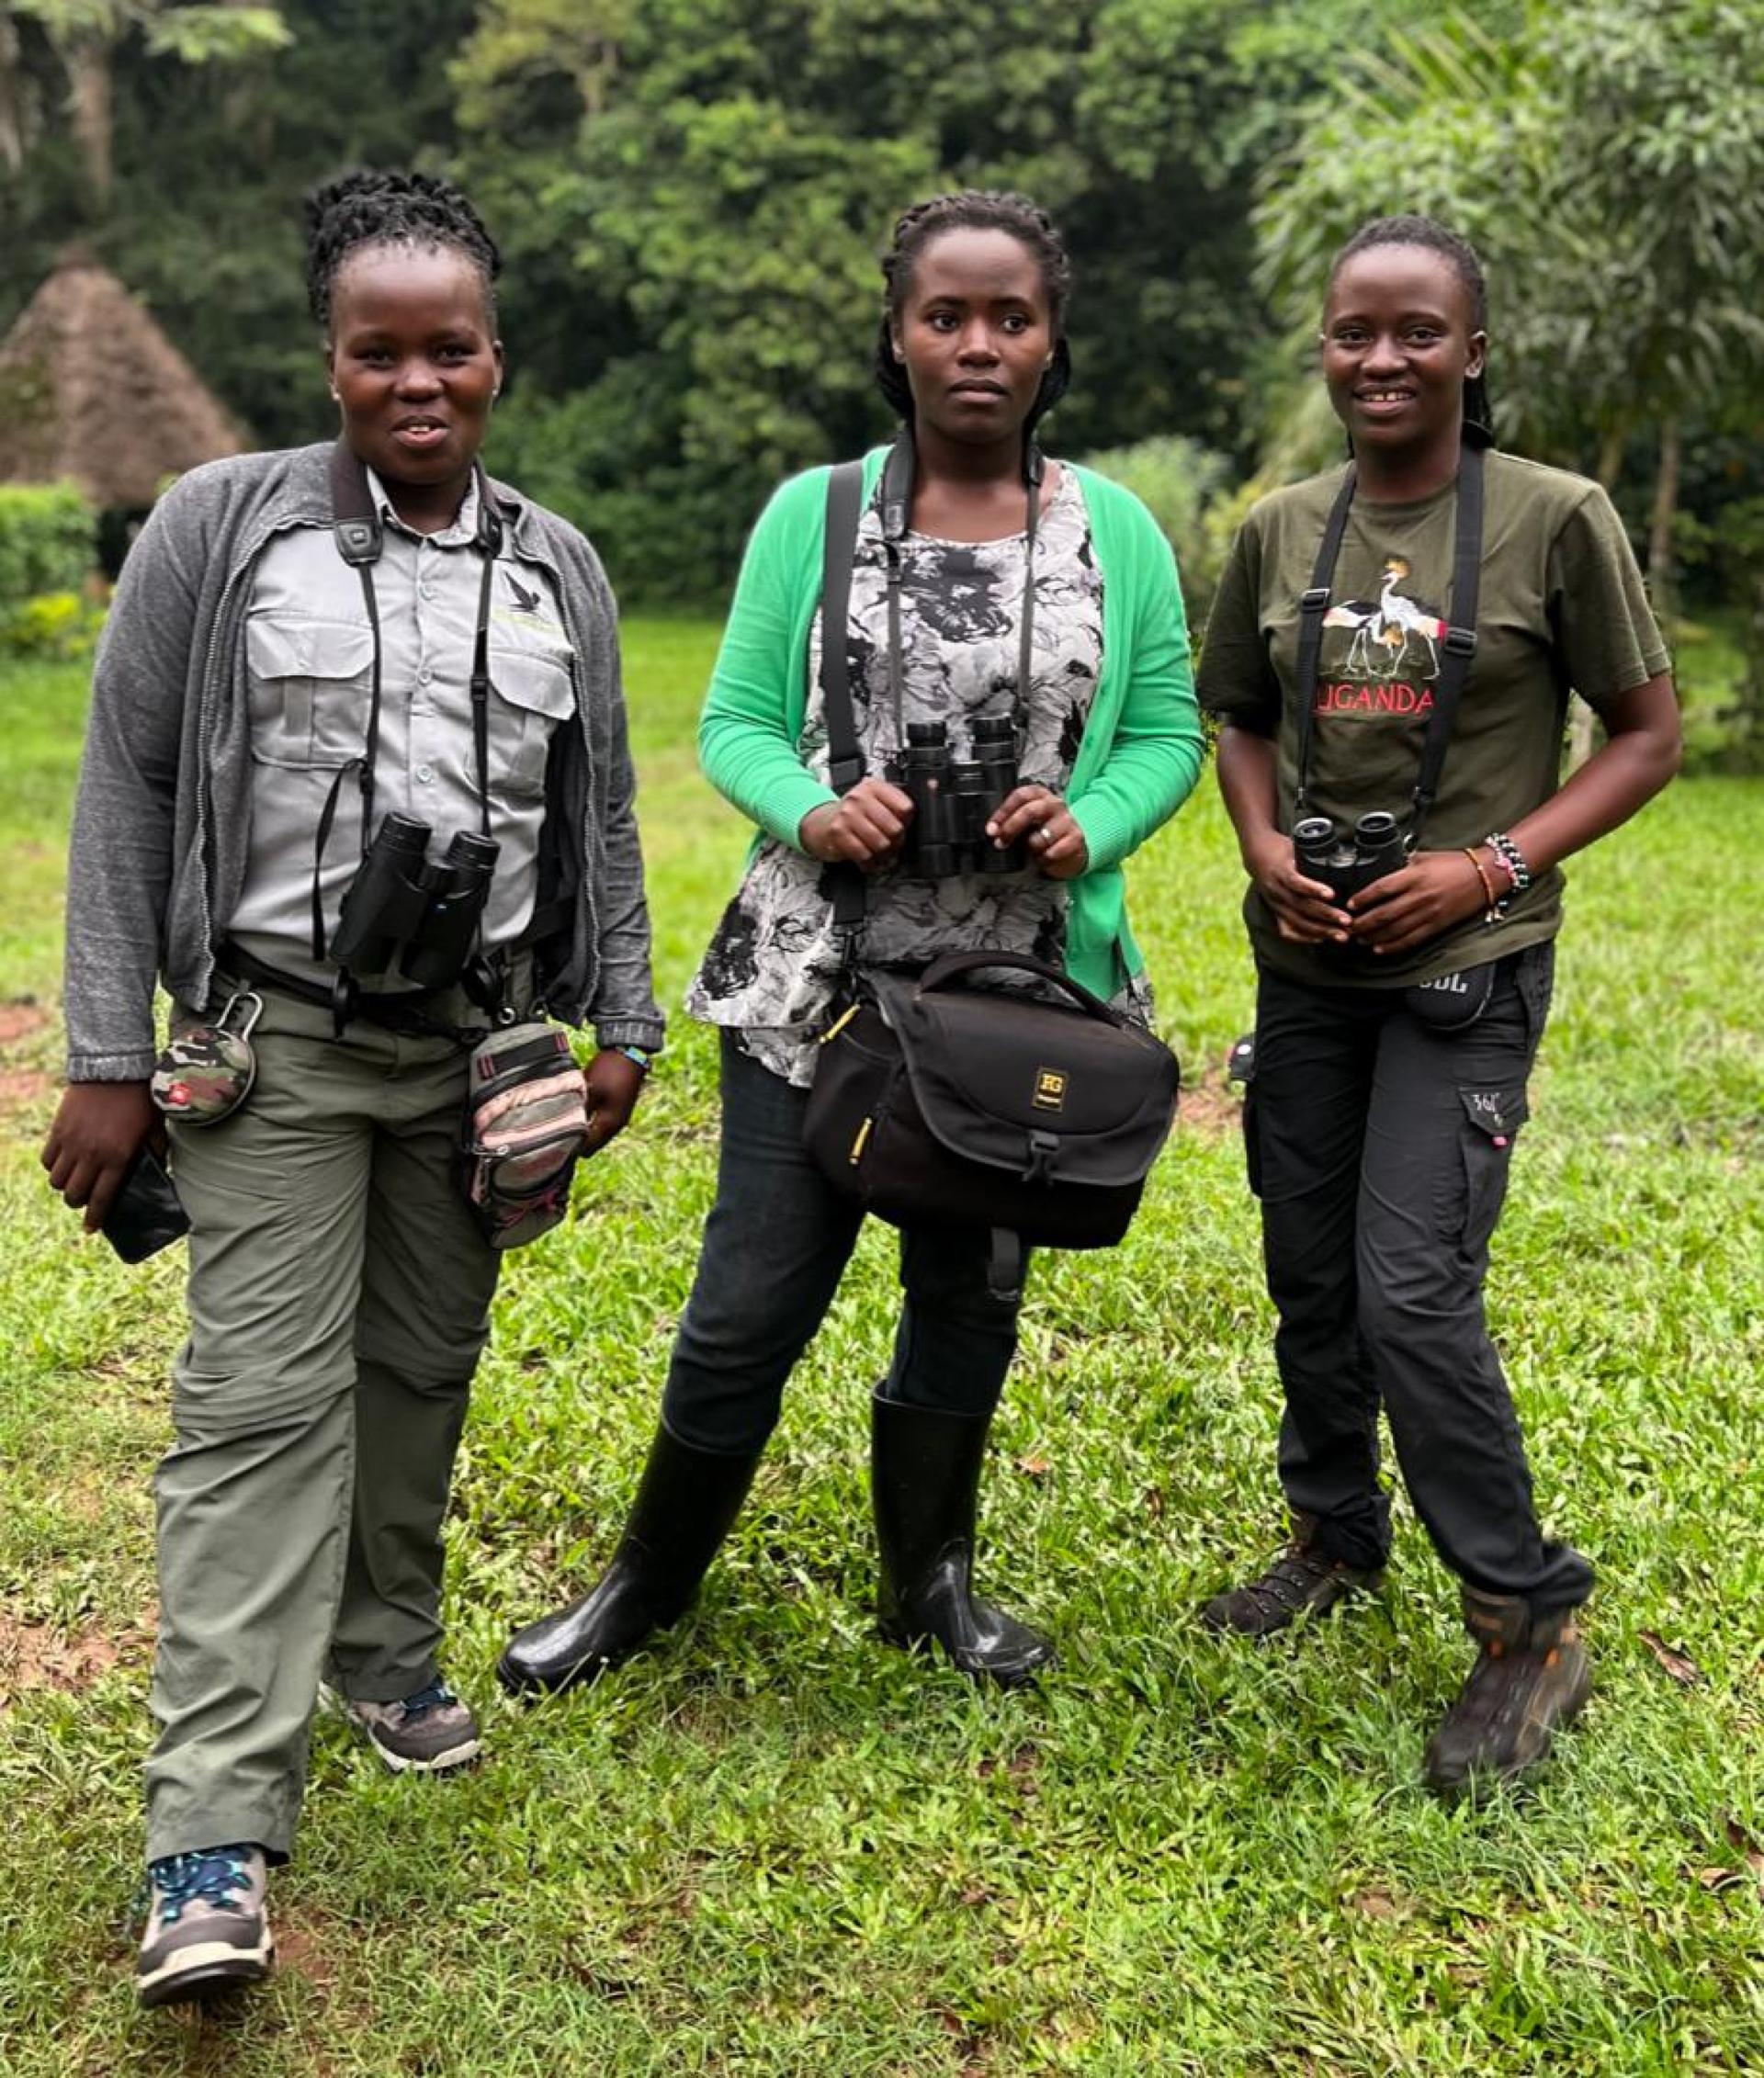 Uganda Women Birders started in 2013, with a sole aim of increasing the participation of Uganda’s women in nature guiding. 